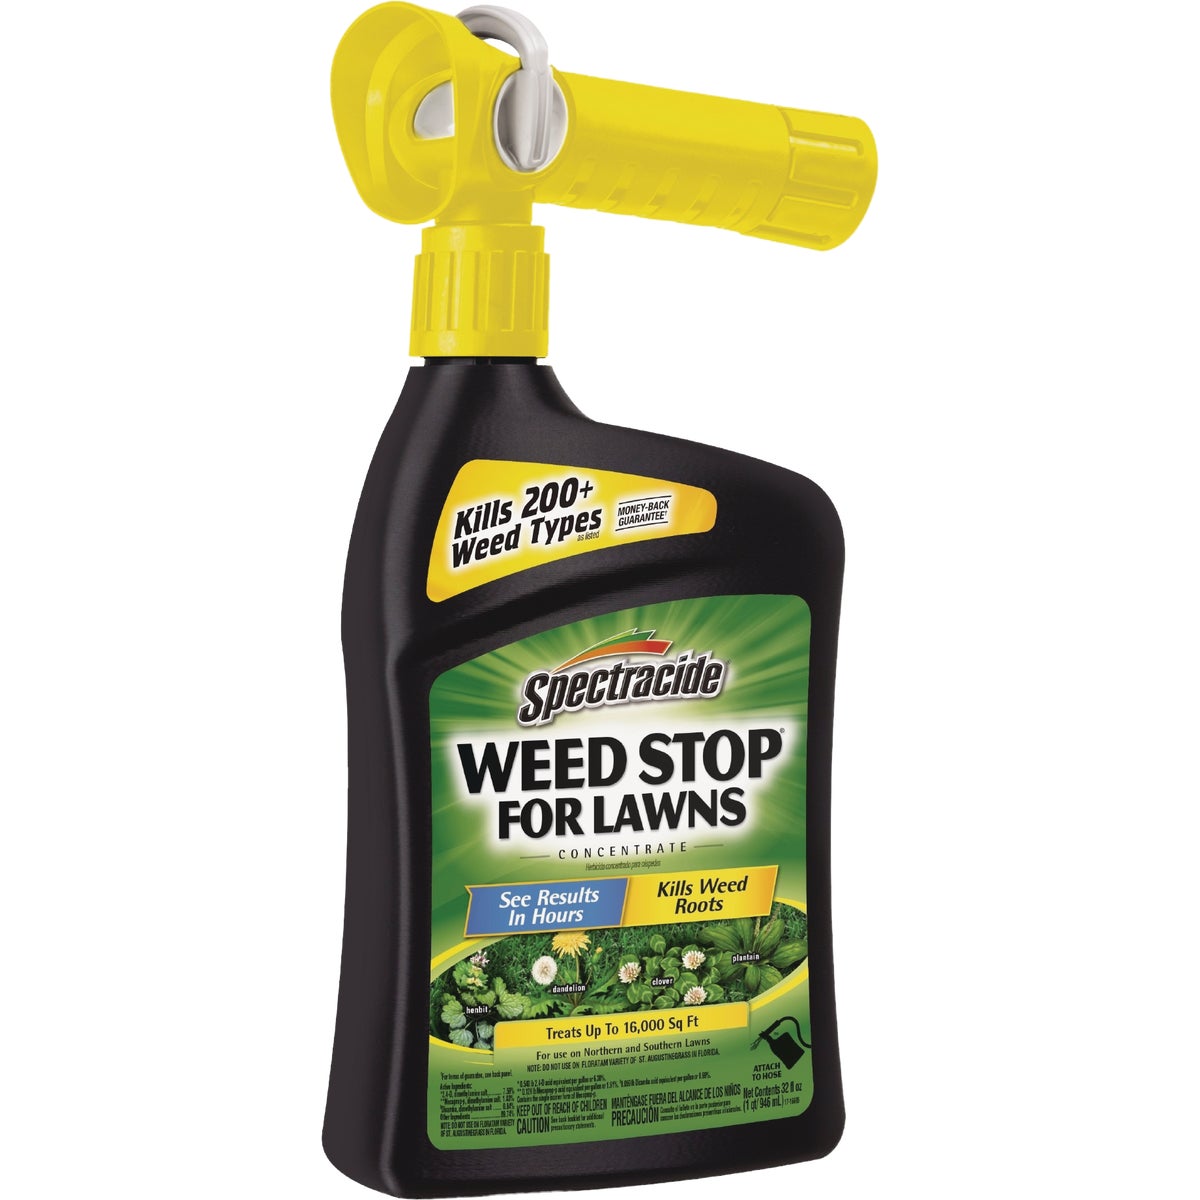 Spectracide Weed Stop for Lawns 32 Oz. Ready to Spray Weed Killer